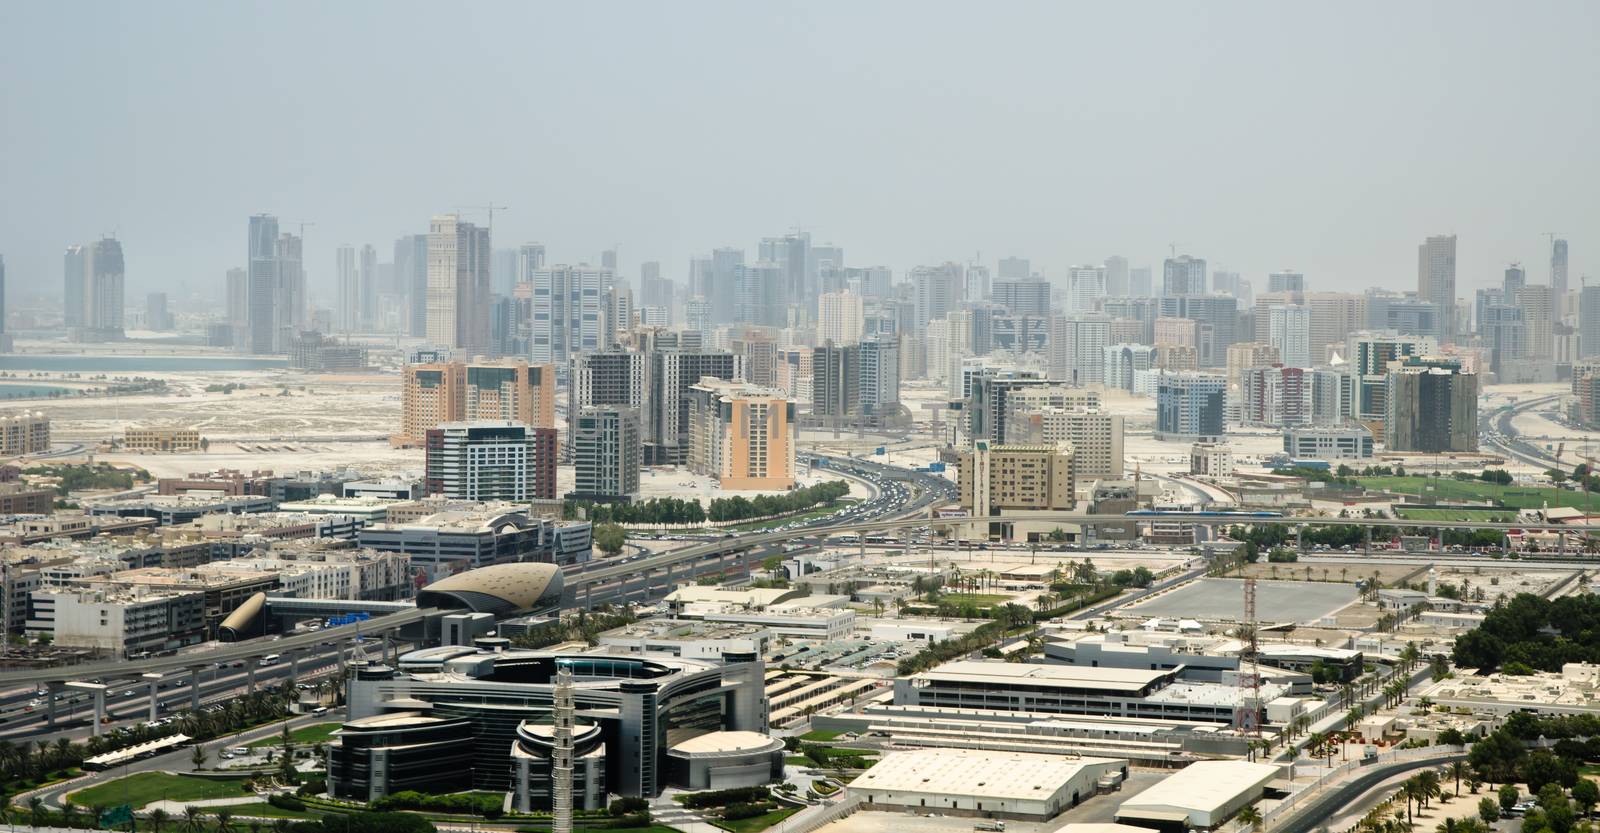 Aerial view of Dubai city with apartments and skyscraper (United Arab Emirates)